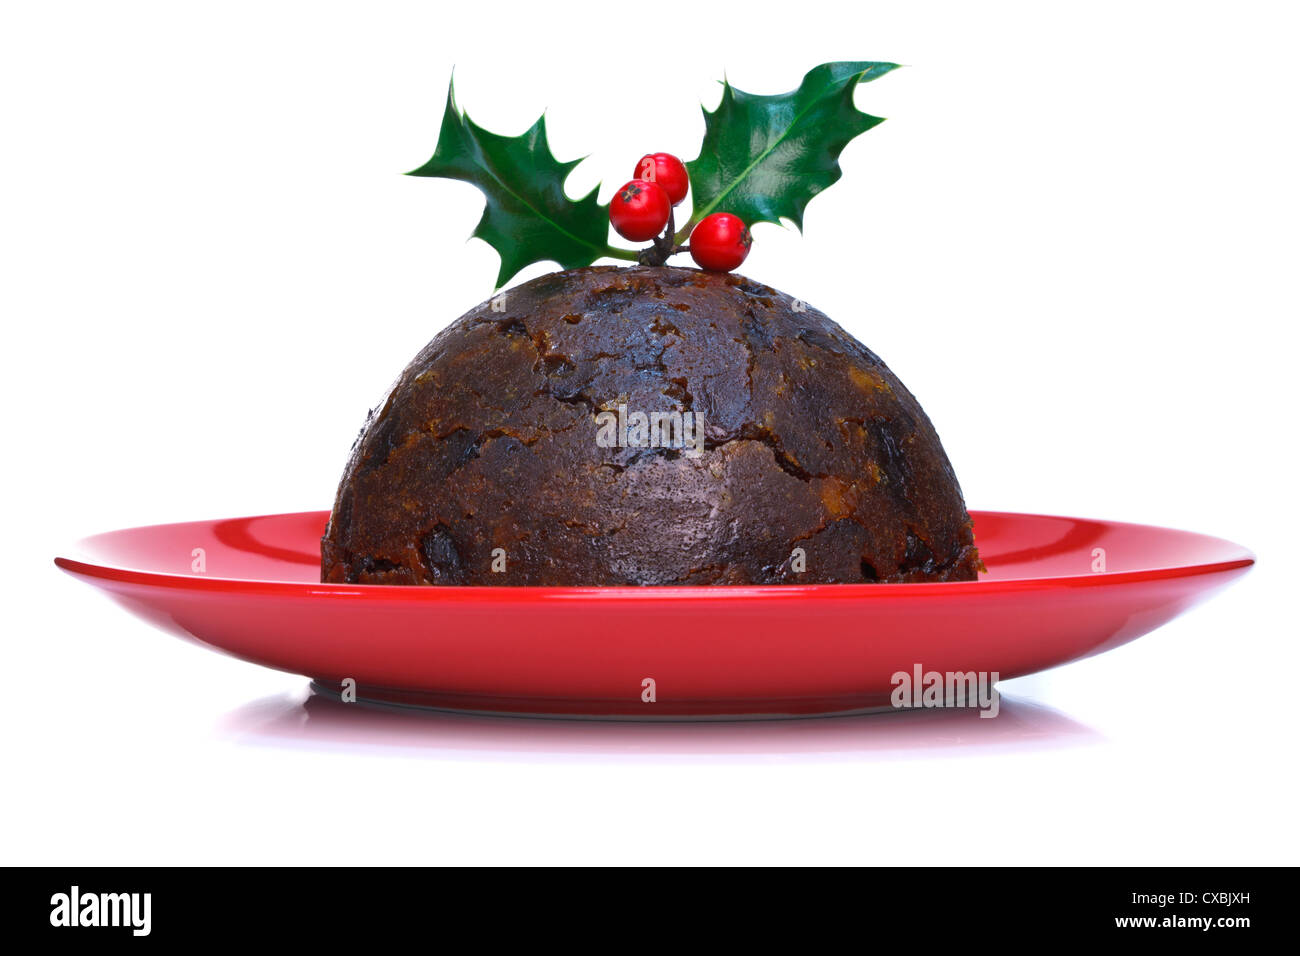 Photo of a steamed Christmas pudding with holly on top isolated on a white background. Stock Photo